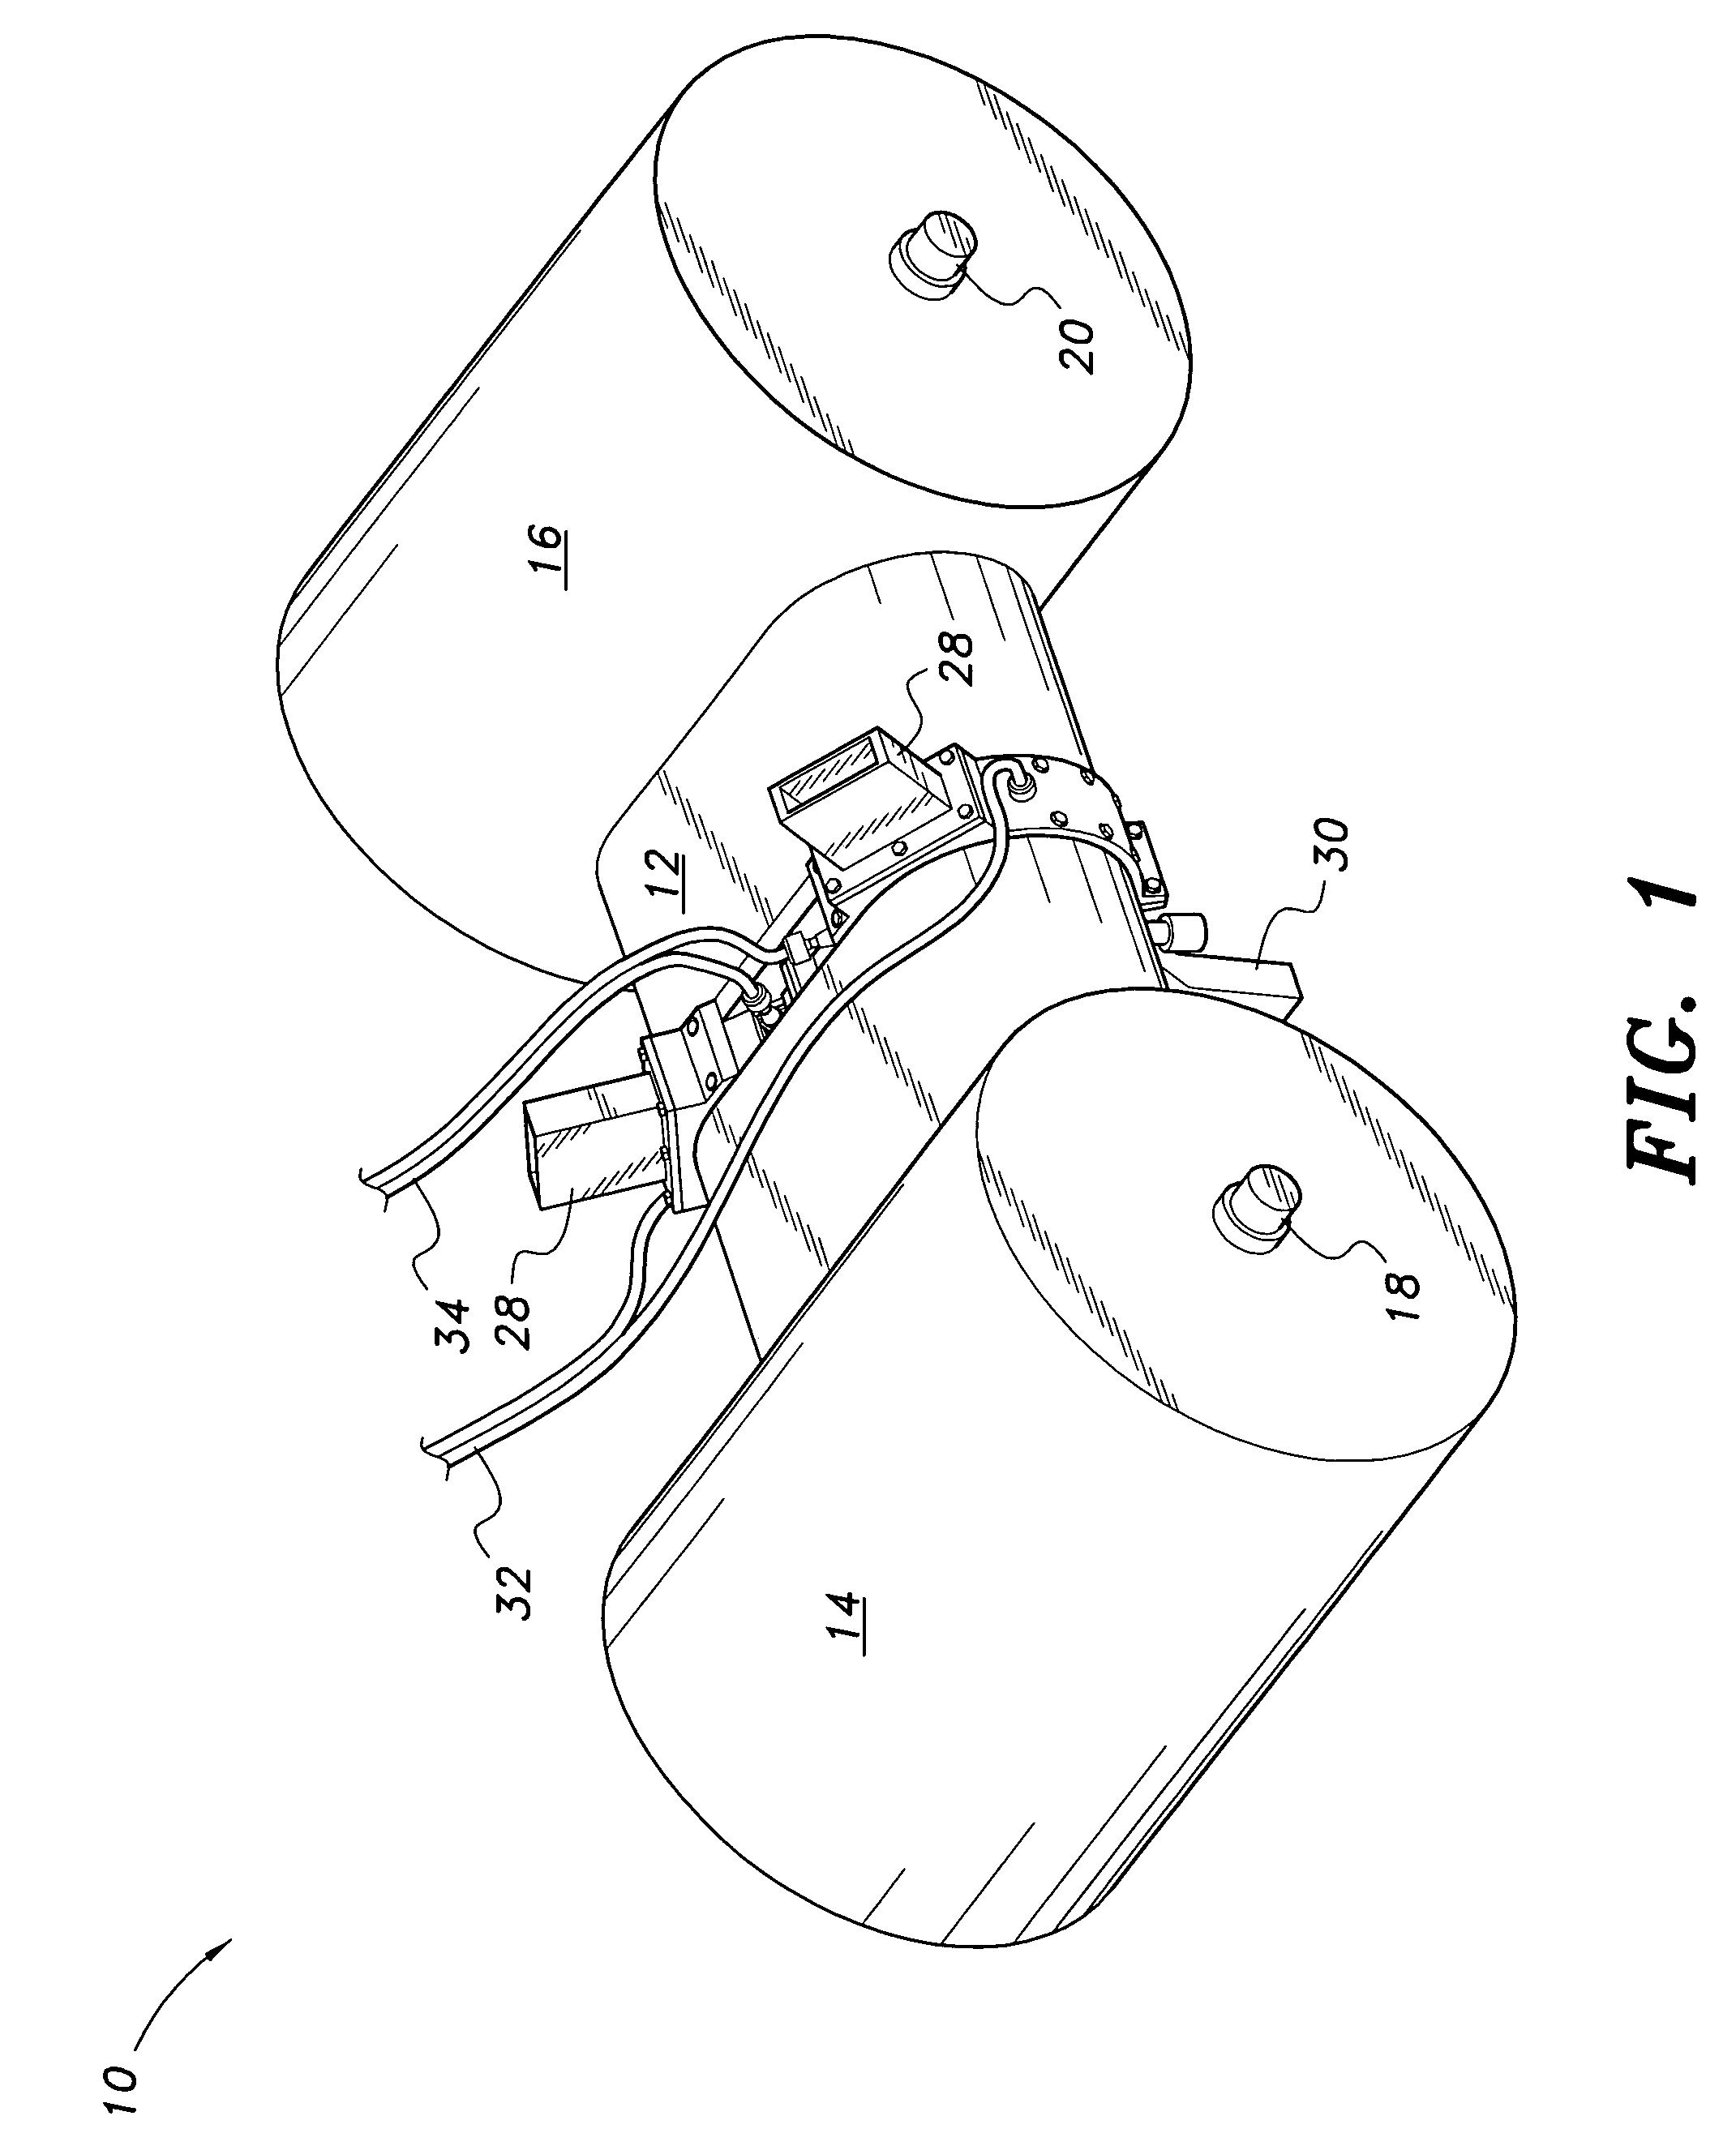 Valve system for opposed piston engines